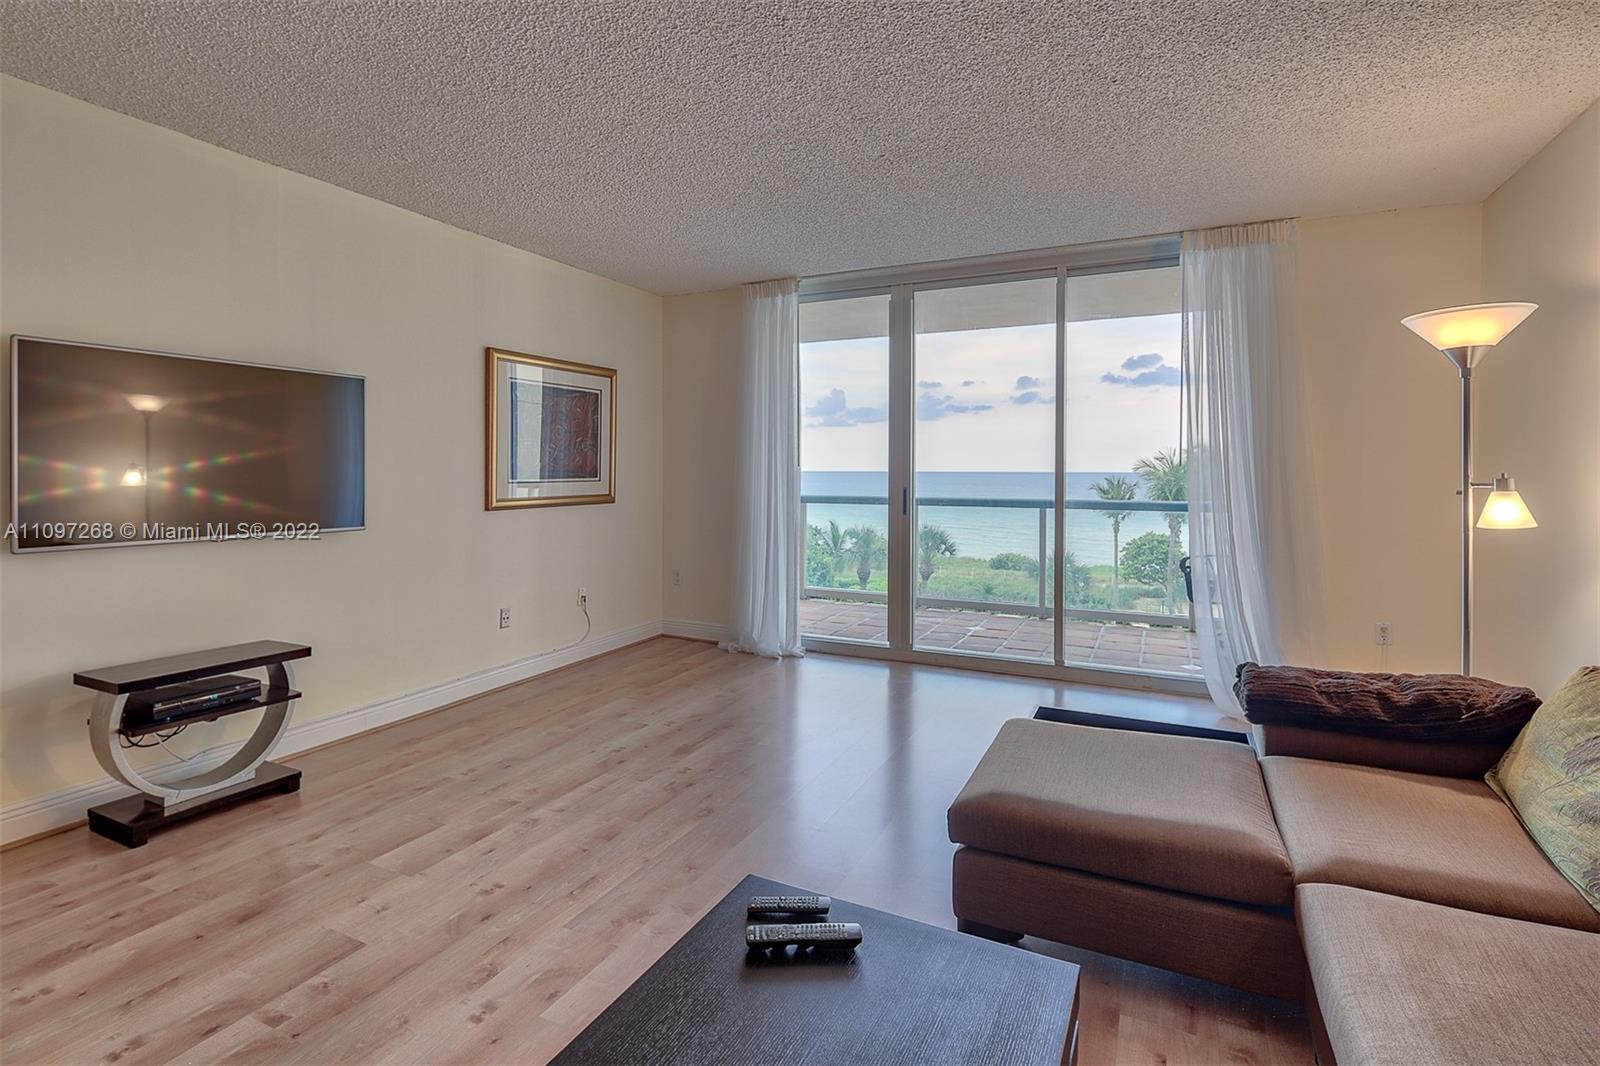 Photo 1 of Champlain Towers East Con Apt 4C in Surfside - MLS A11097268